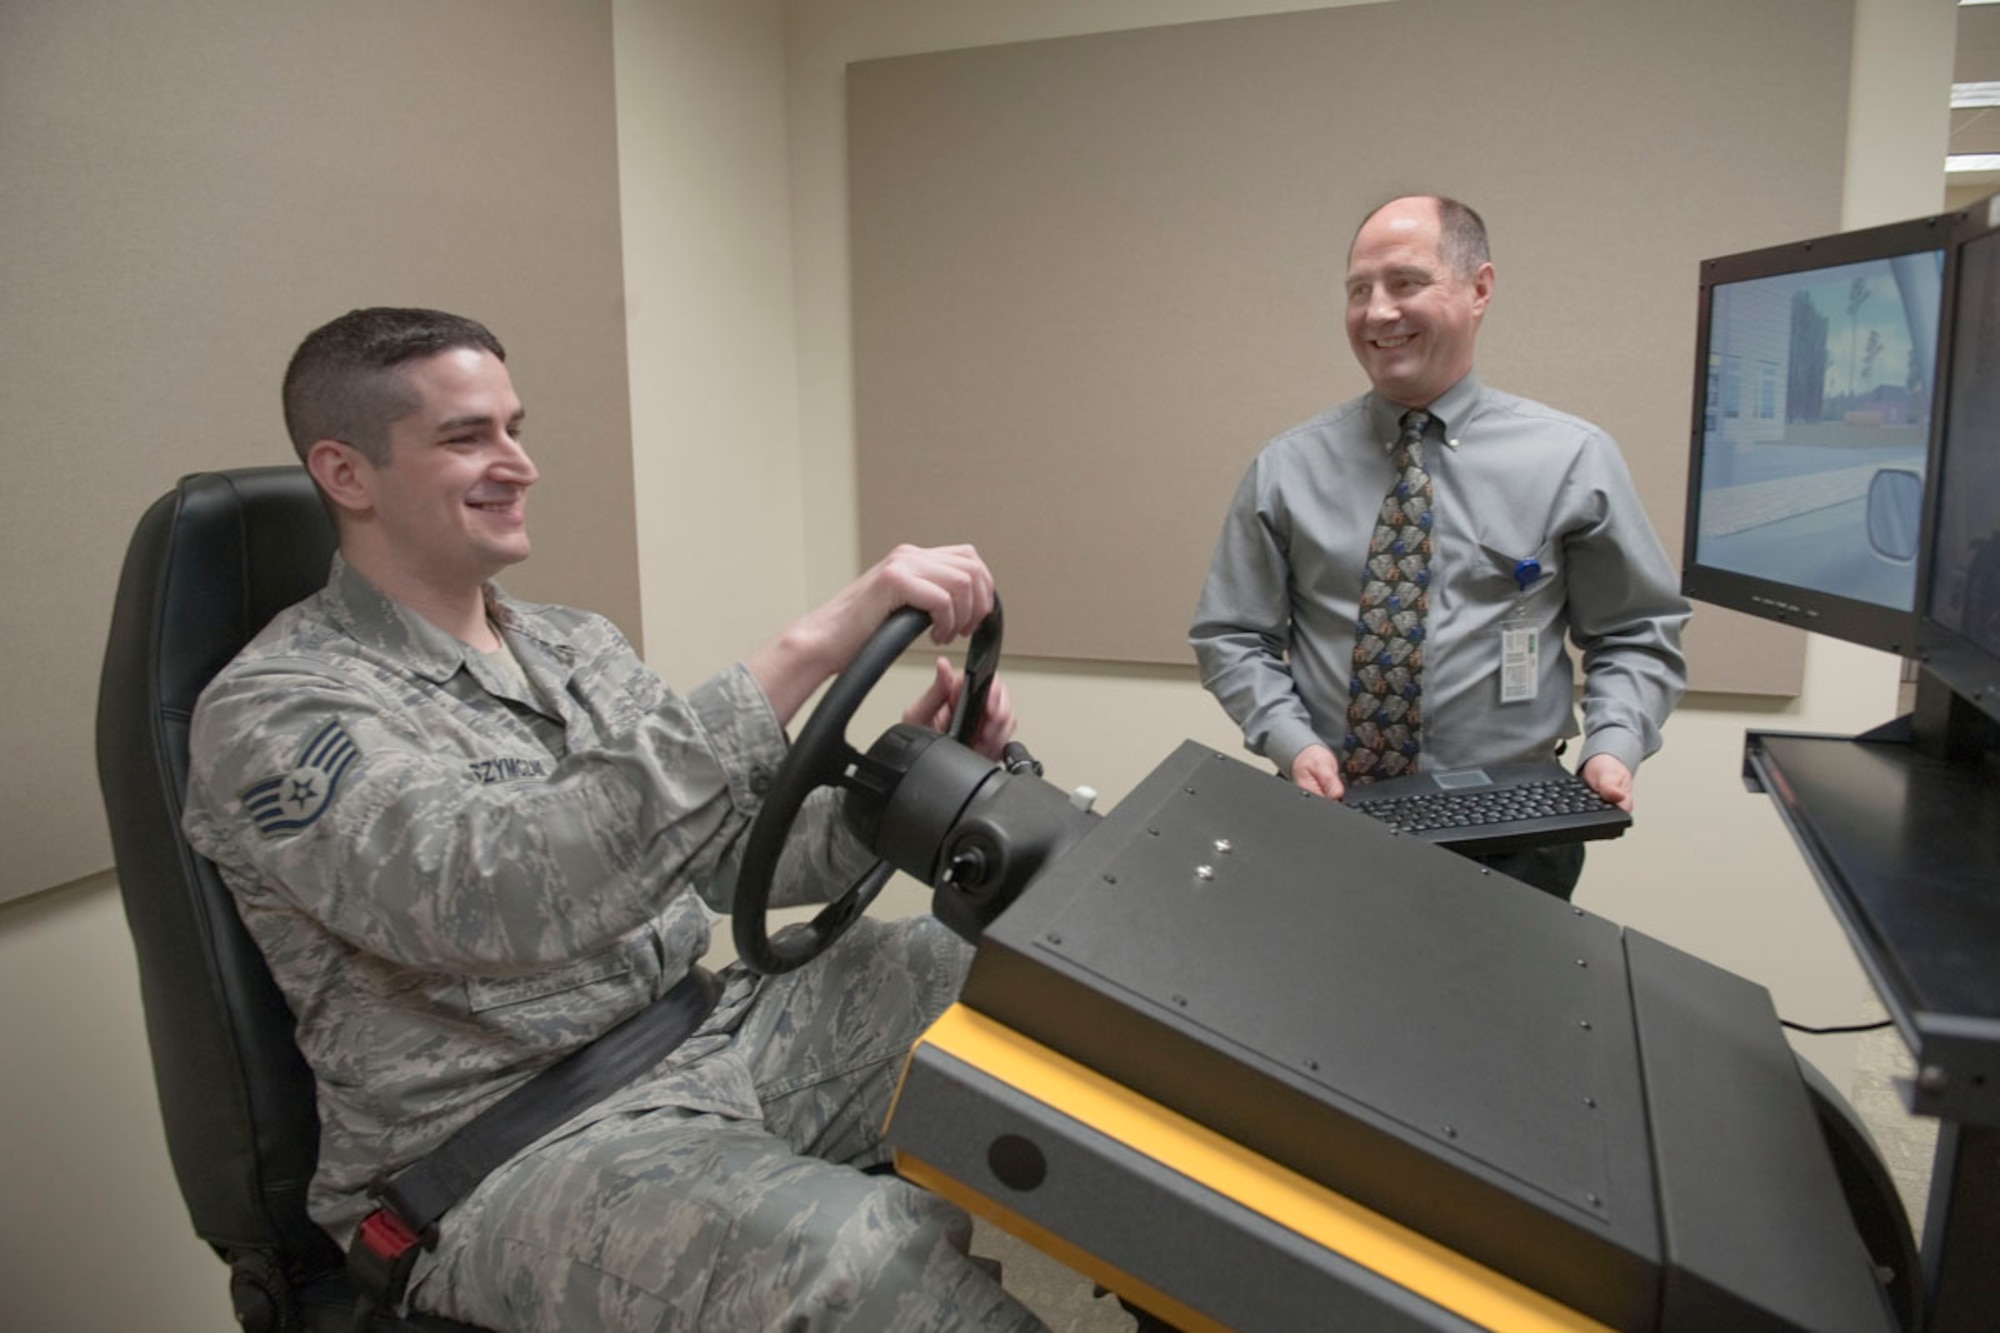 Rick Vandegrift observes Air Force Staff Sgt. Robert Szymczak operate a Virtual Learning Driving Simulator in the Traumatic Brain Injury Clinic, Feb. 17, 2012, part of the Lynx Wing mental health clinic on Joint Base Elmendorf-Richardson. The simulator helps establish if the patient is capable of driving, their level of attention to detail, their reaction times and evaluates their visual processing of information. Szymczak is NCOIC of the mental health center resiliency element and native of Durand, Mich. Vandegrift is a certificed occupational therapy technician for the Traumatic Brain Injury Clinic and native of Bozeman, Mont. (U.S. Air Force photo/Staff Sgt. Robert Barnett)